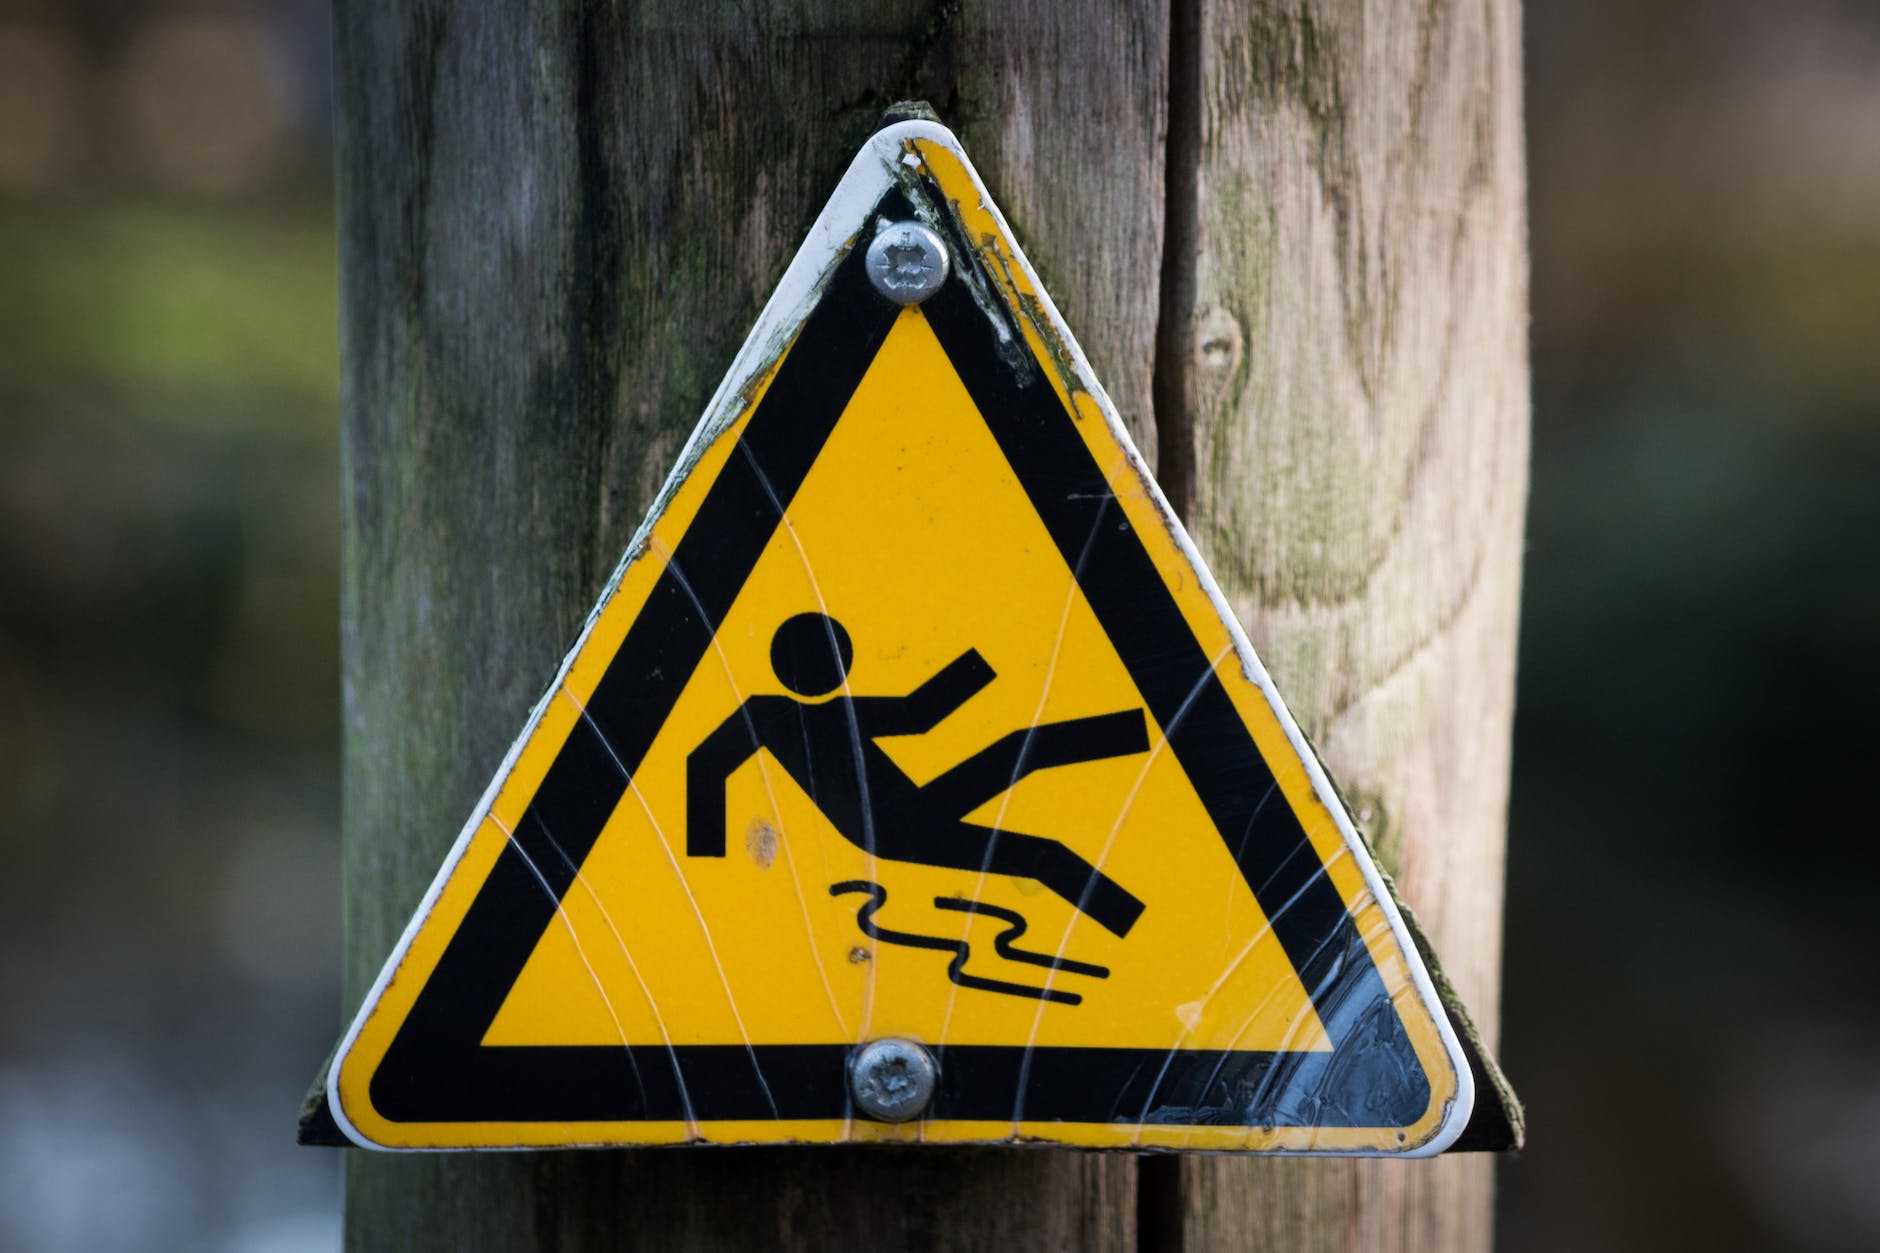 Slip Trip and Fall Safety Quiz